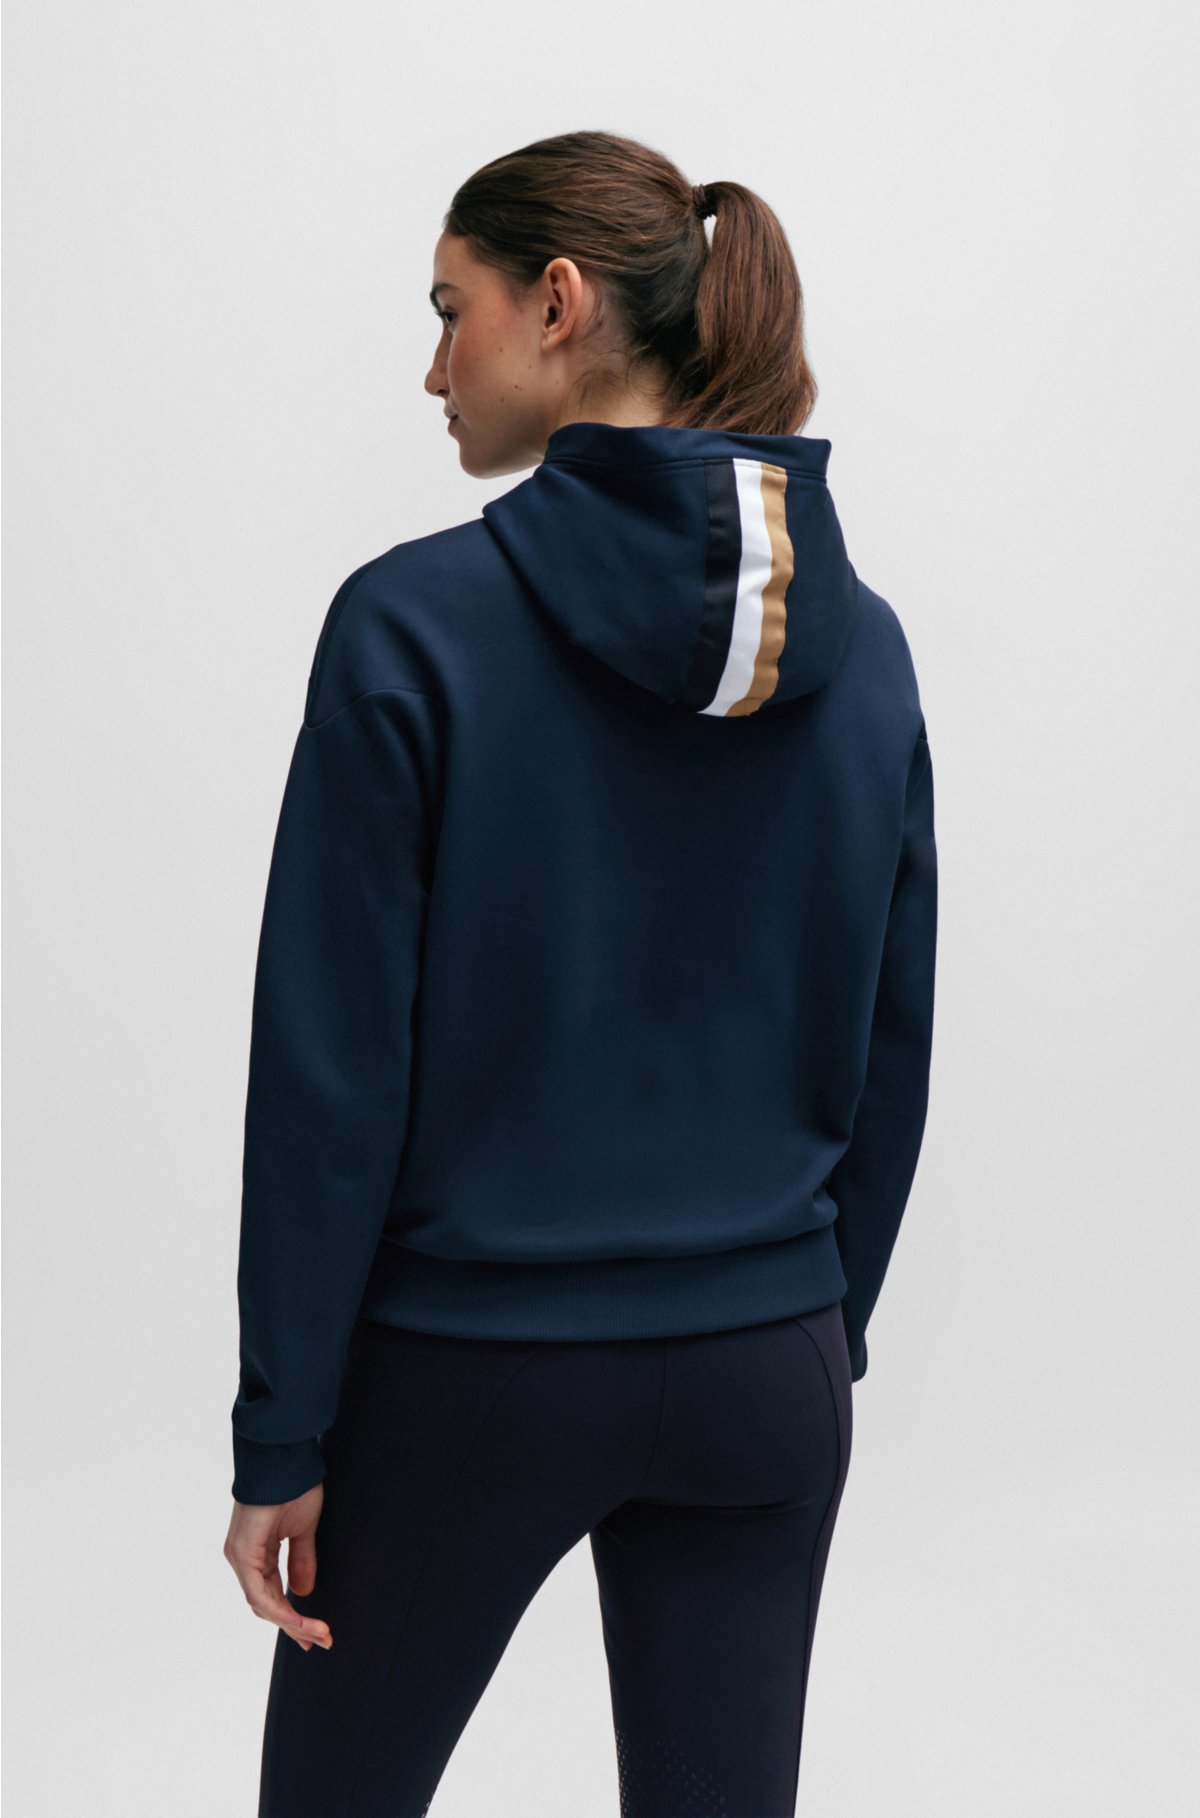 Equestrian zip-up hoodie with silicone logo patch, Dark Blue